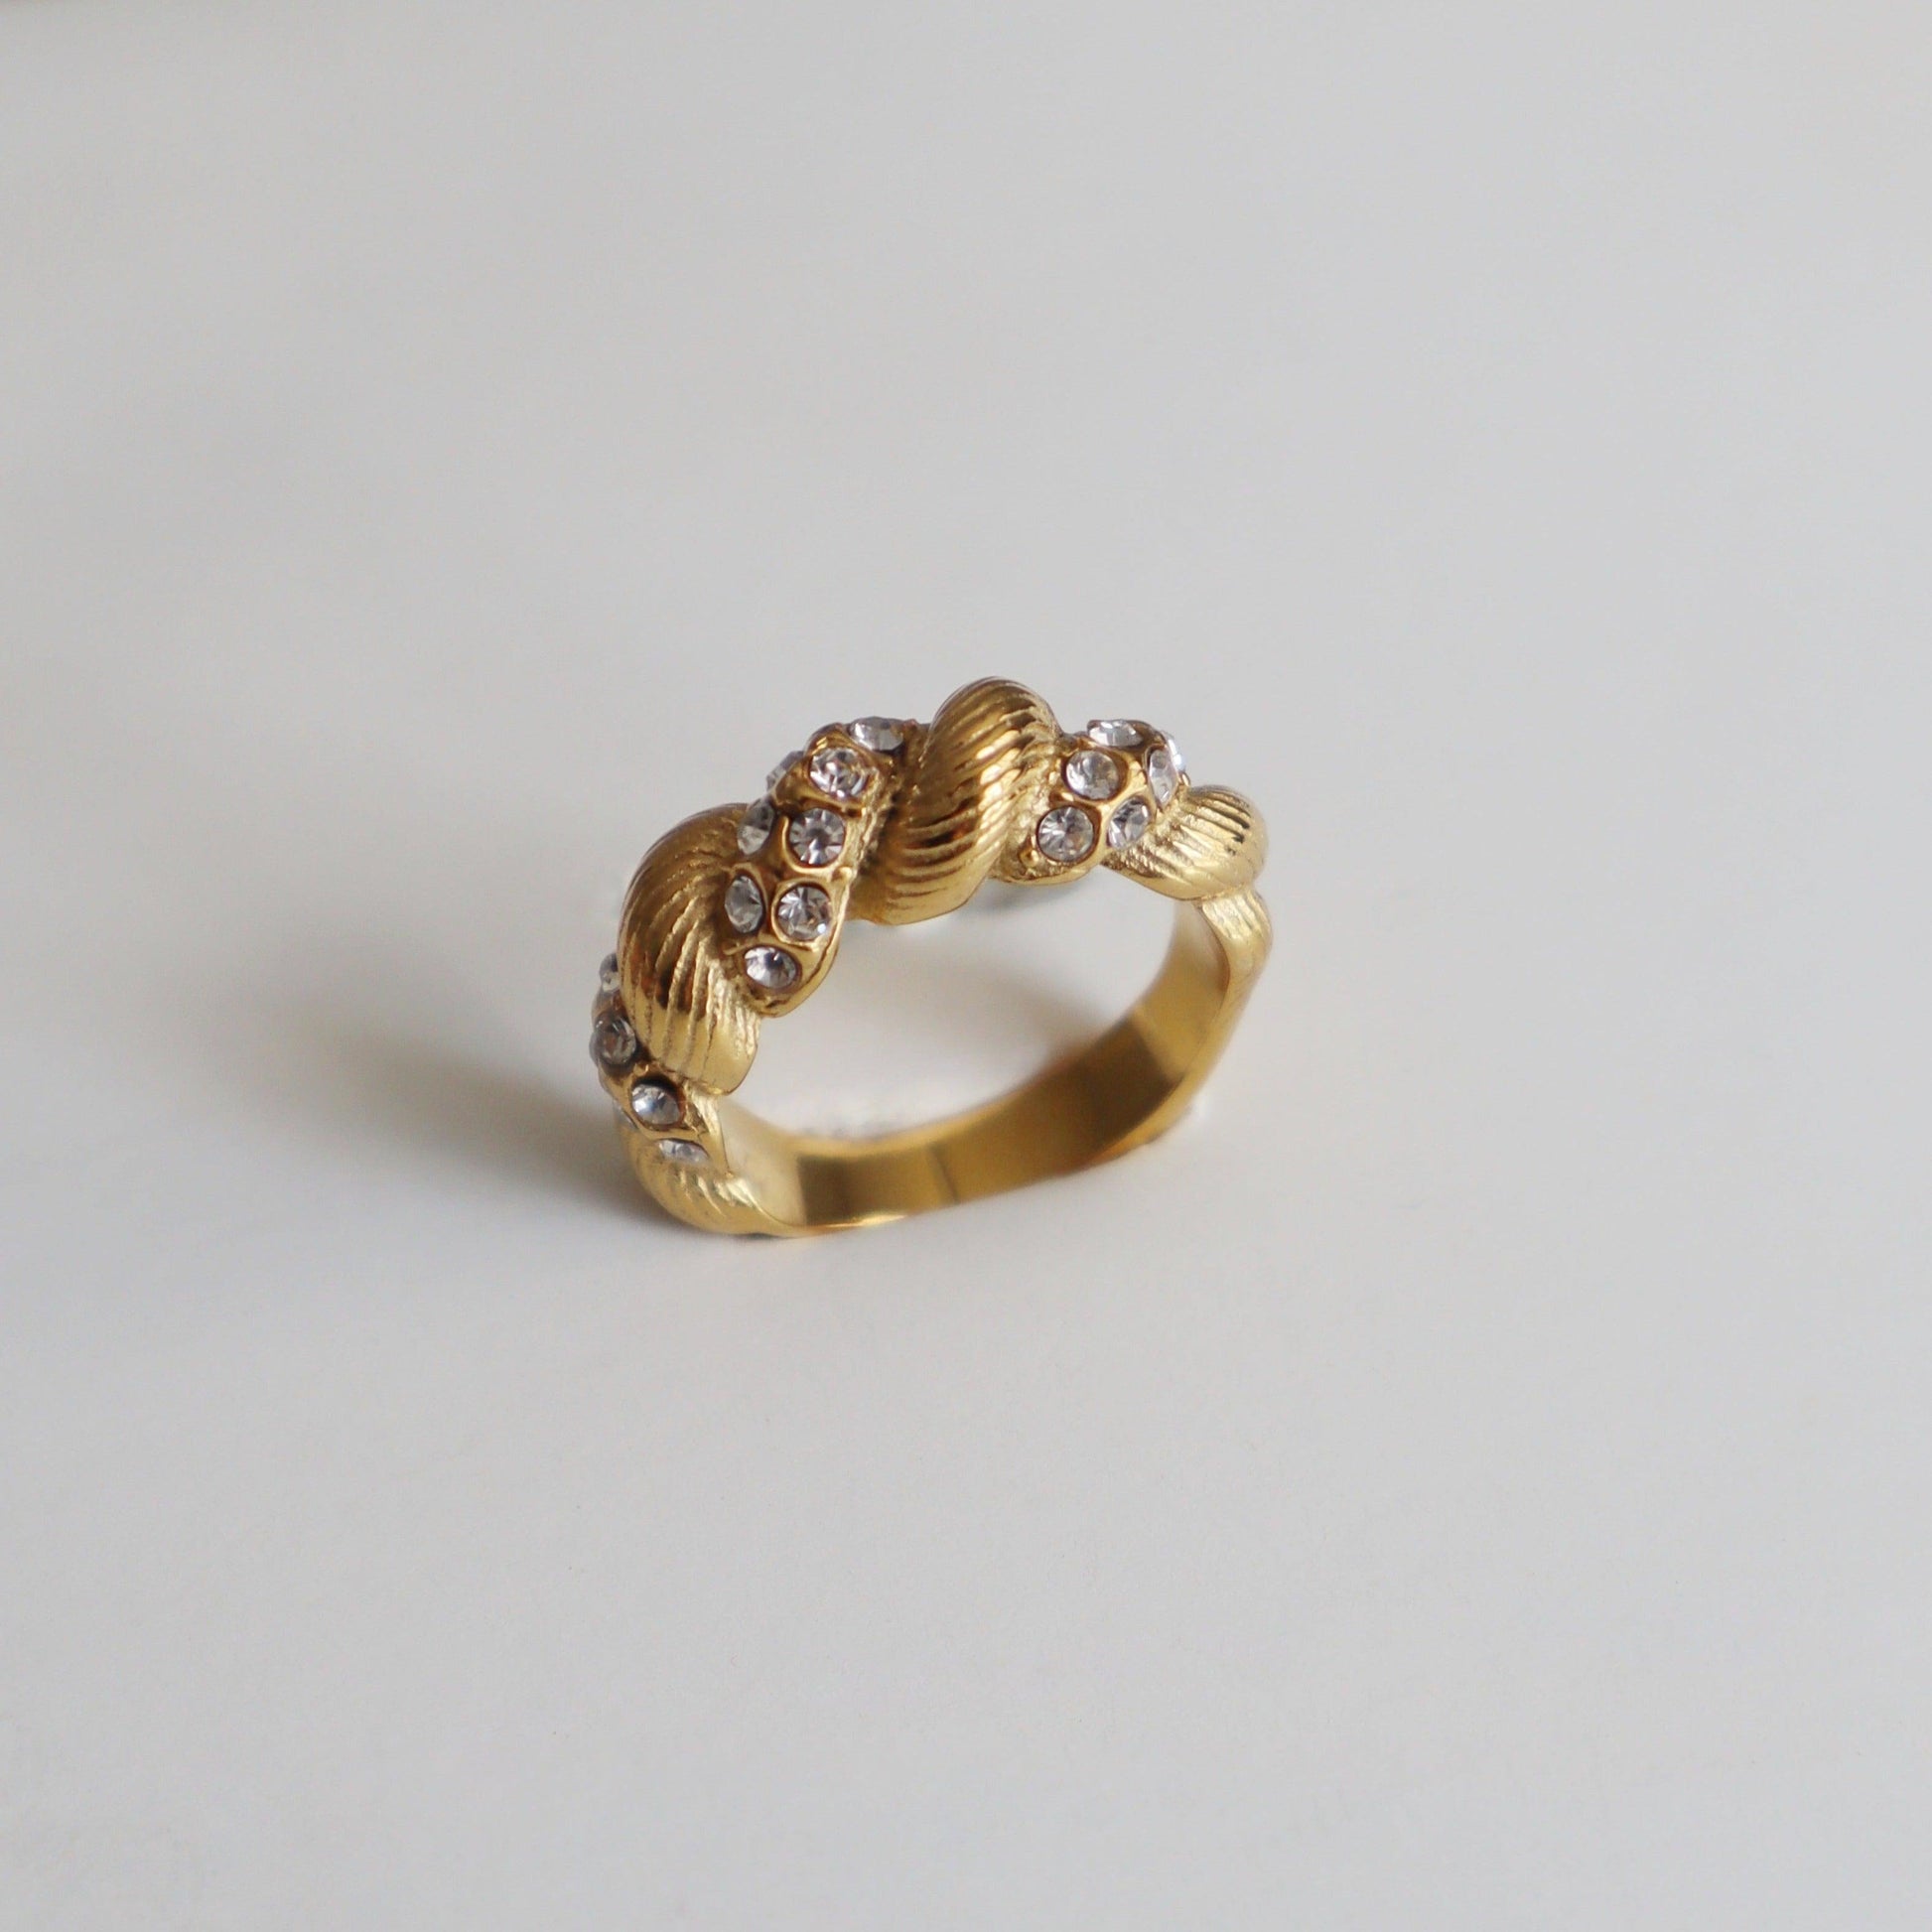 Ari Ring | Twisted Ring - JESSA JEWELRY | GOLD JEWELRY; dainty, affordable gold everyday jewelry. Tarnish free, water-resistant, hypoallergenic. Jewelry for everyday wear